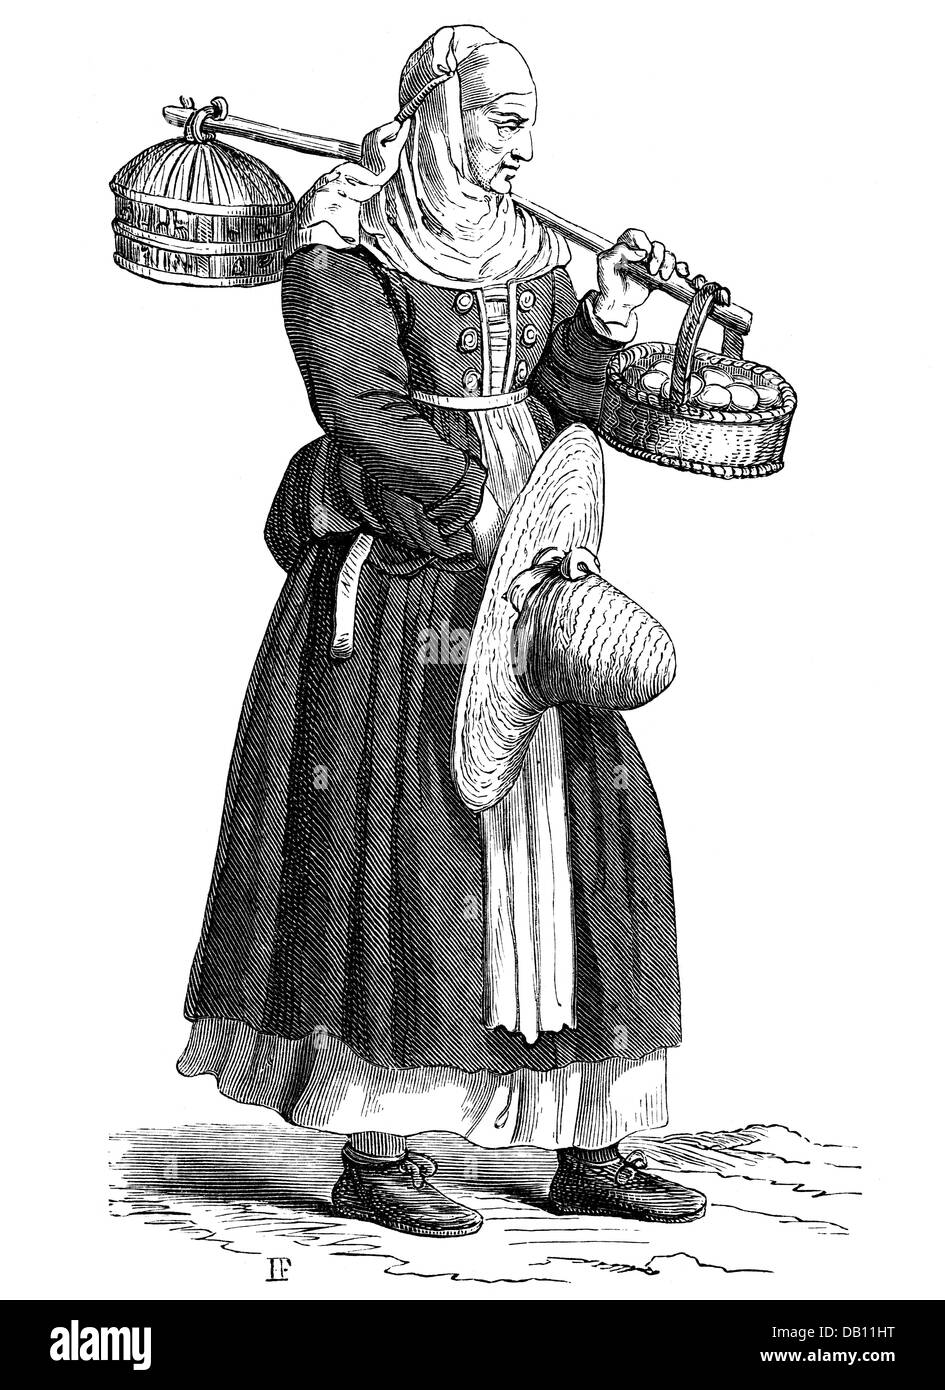 trade, merchants, female egg vendor, after Cesare Vecellio (circa 1521 - 1610), woodcut, 16th century, 16th century, graphic, graphics, profession, professions, merchants, vendor, vender, vendors, venders, saleswoman, saleswomen, salesladies, merchant, full length, walking, walk, going, go, carrying, carry, basket, baskets, clothes, outfit, outfits, bonnet, bonnets, dress, dresses, hat, hats, foodstuff, victuals, nourishment, nourishments, food, trader, traders, egg, eggs, woodcut, woodcuts, historic, historical, female, woman, people, women, Additional-Rights-Clearences-Not Available Stock Photo